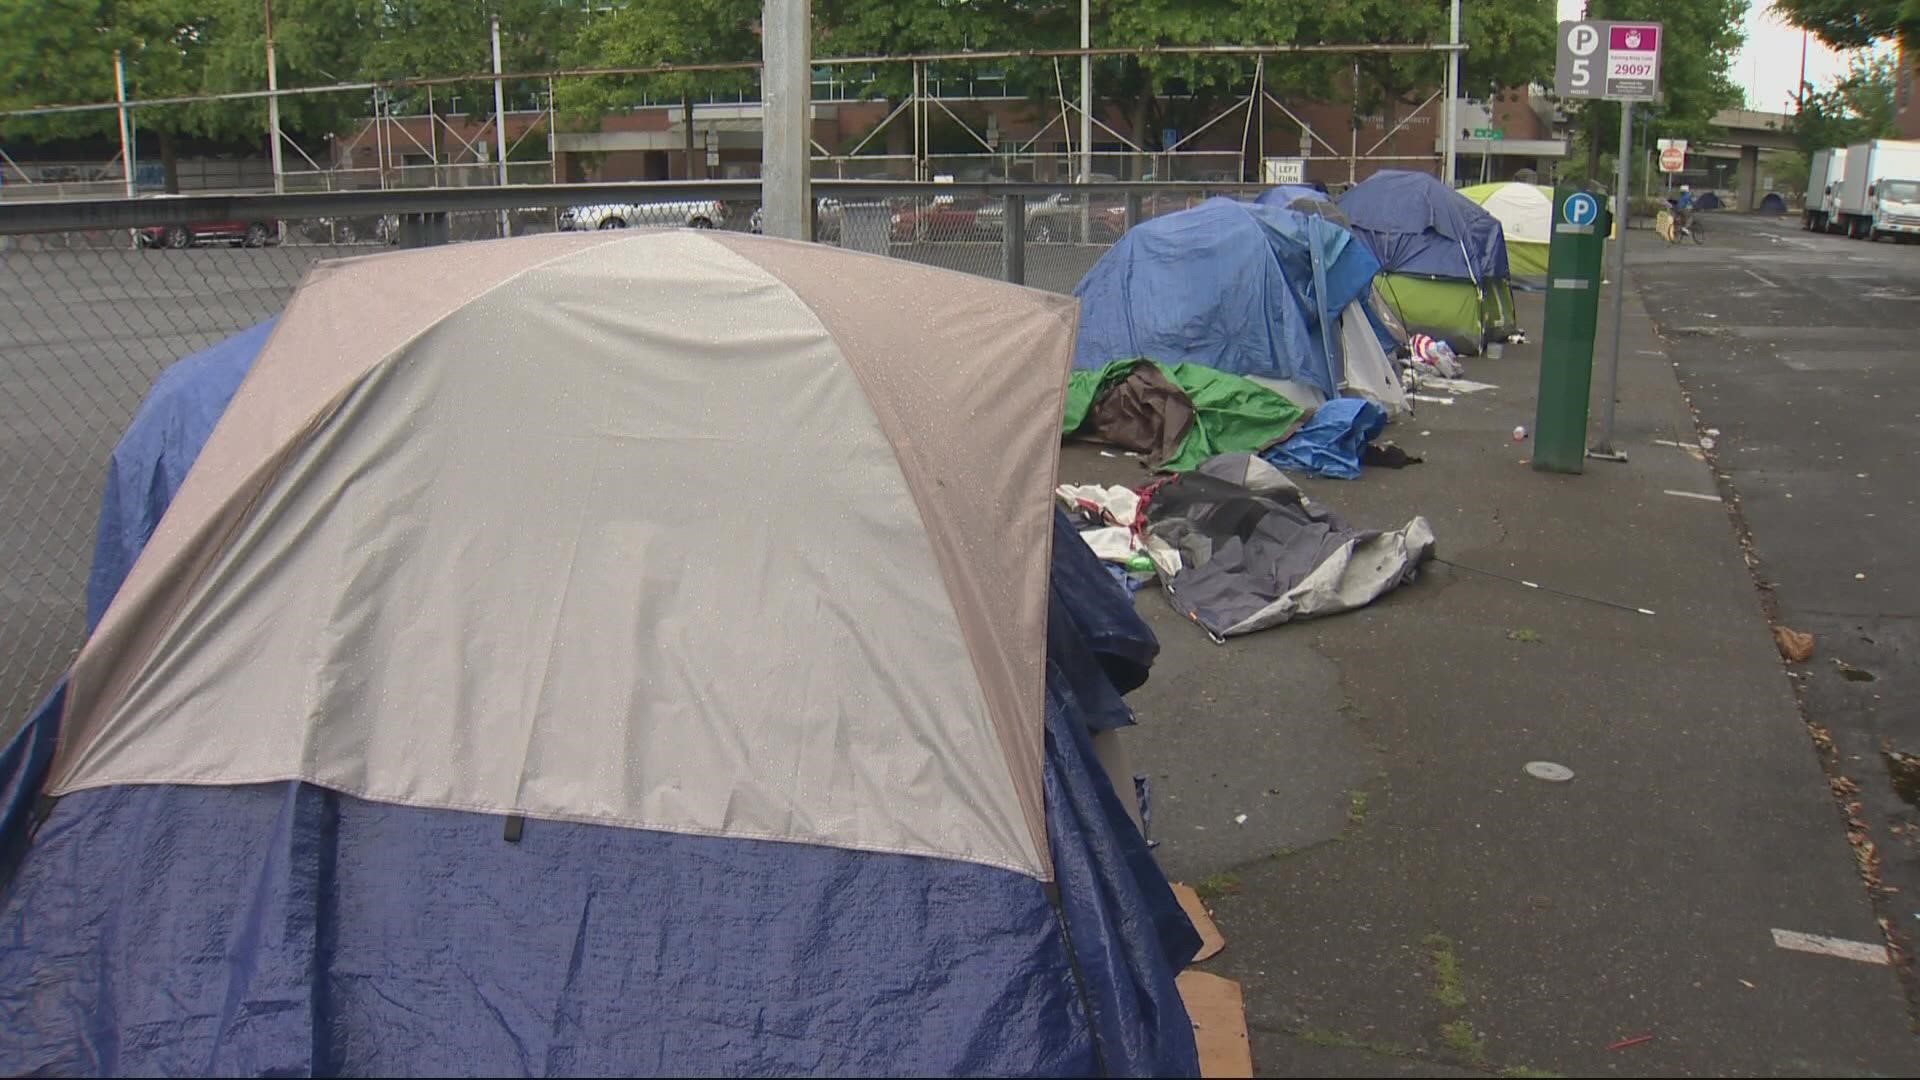 The measure would redirect money towards temporary shelters and away from other homeless services. Metro twice rejected the measure as unconstitutional.